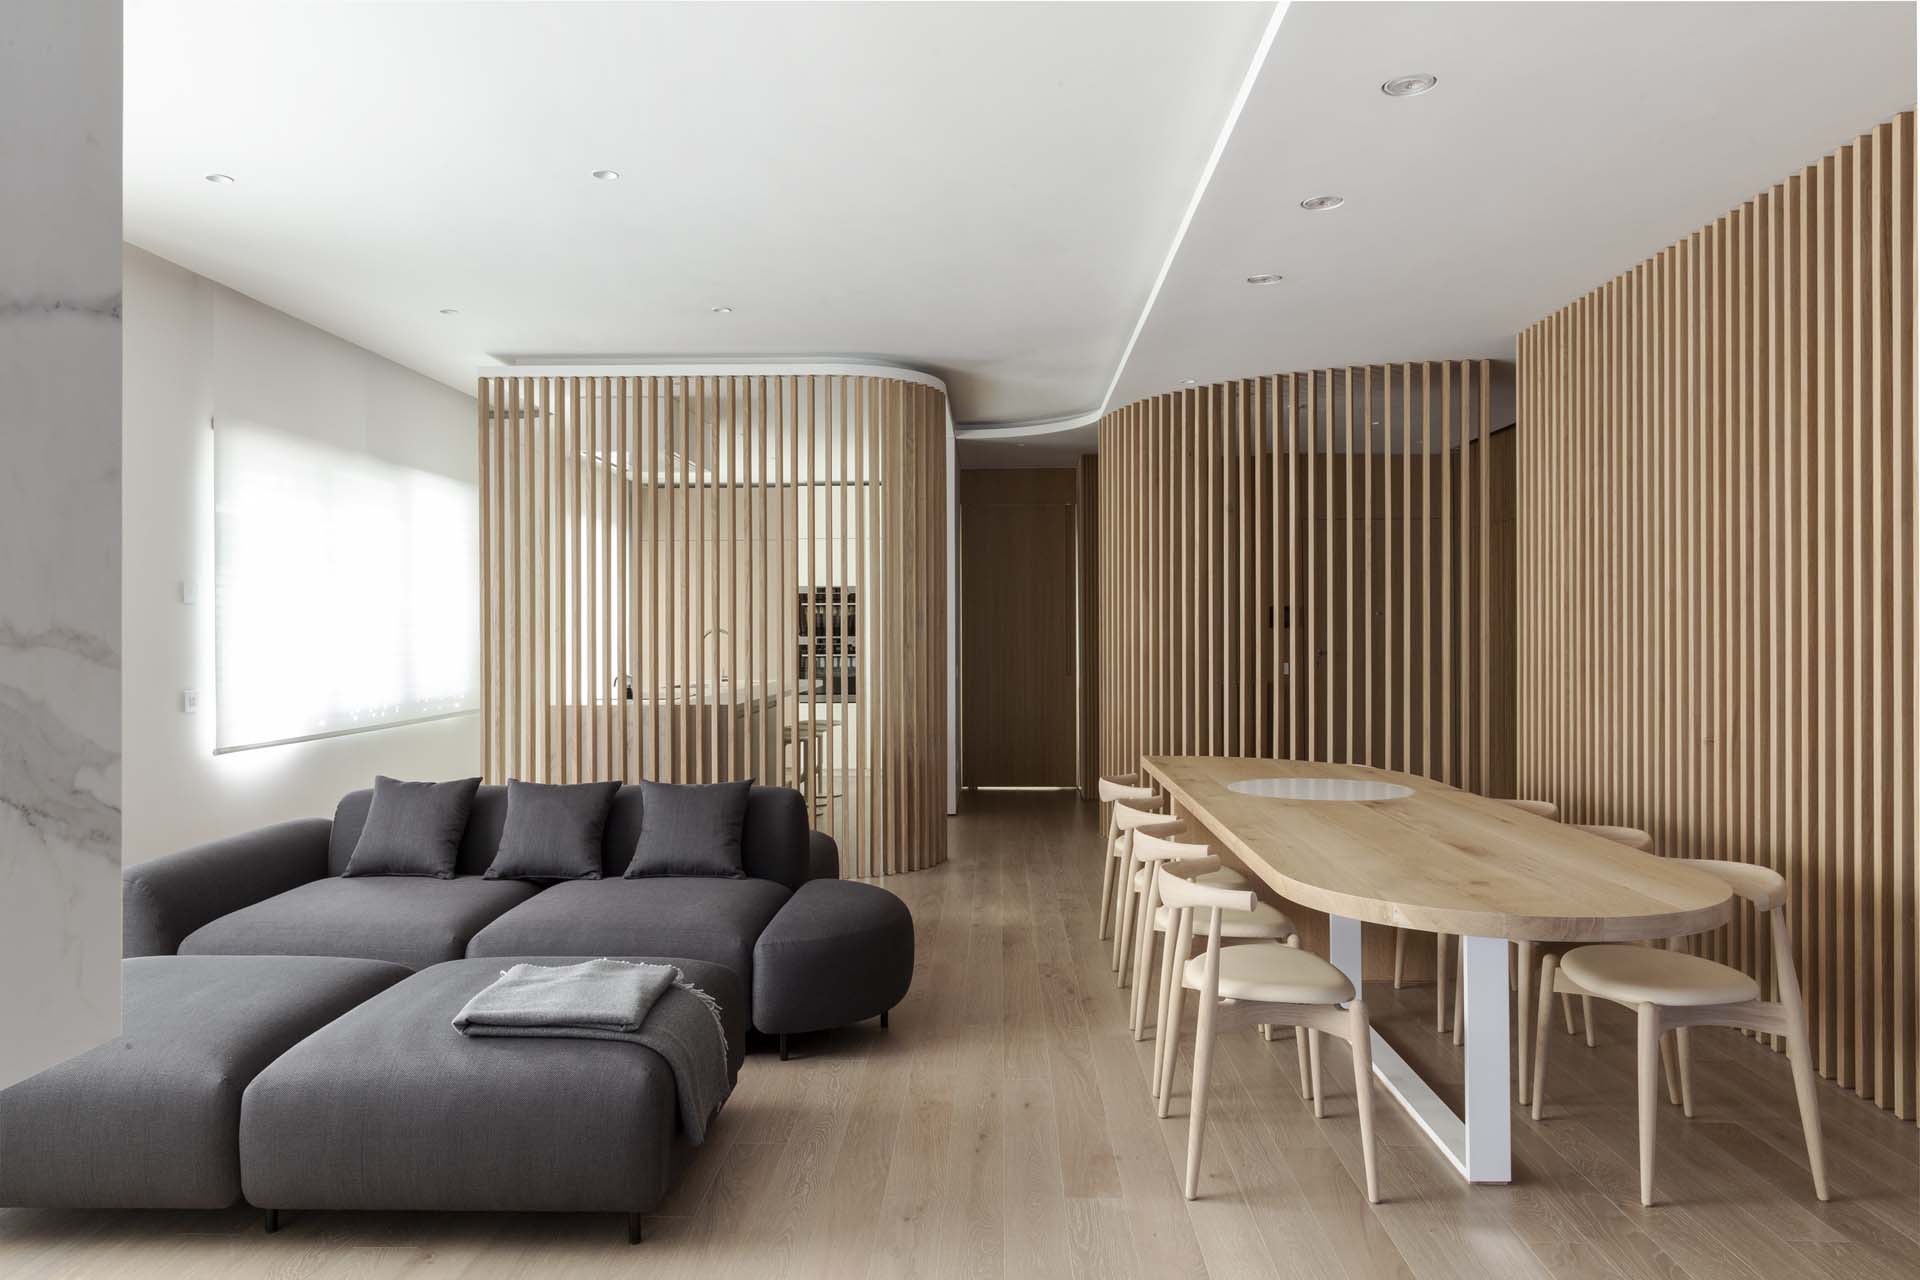 A modern apartment interior uses curved oak partitions to create zones.